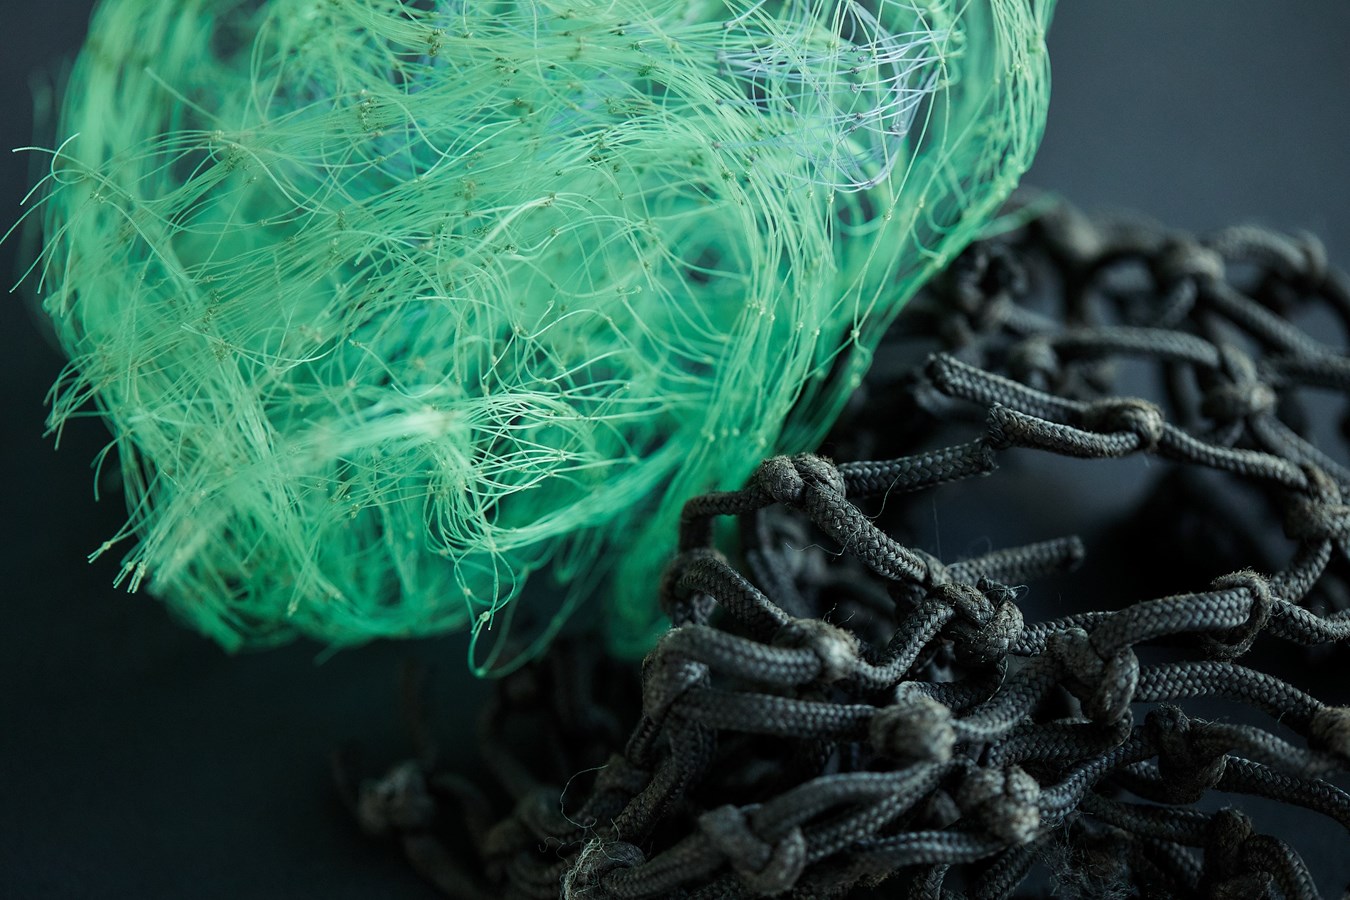 Kia’s 10 must-have sustainability items (recycled fishing nets)